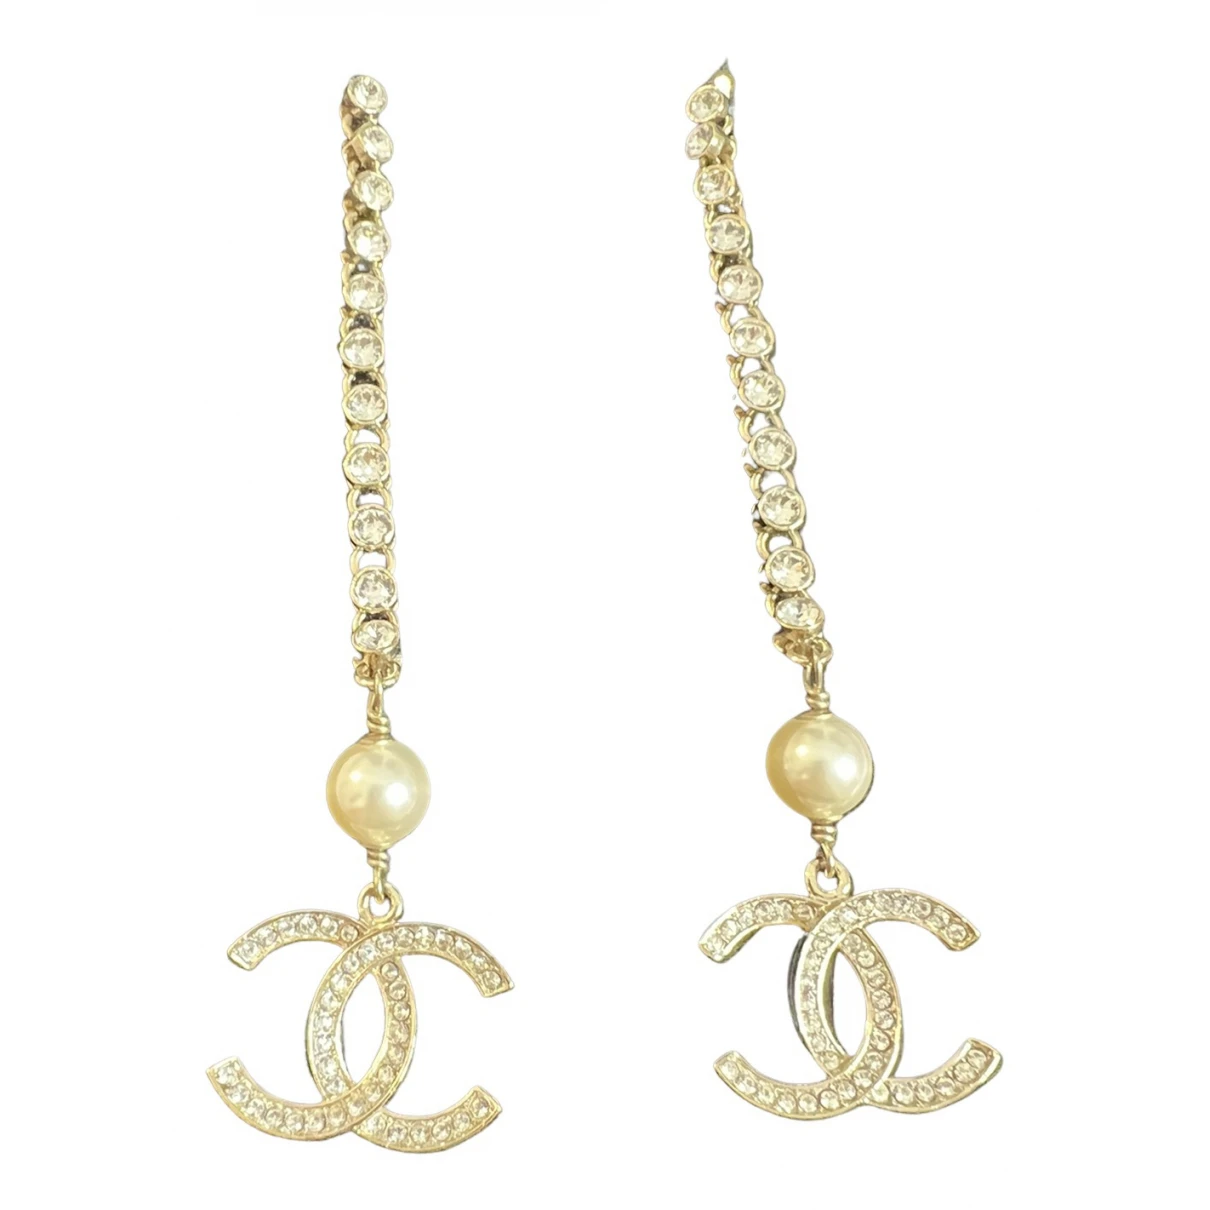 jewellery Chanel earrings CC for Female Crystal. Used condition